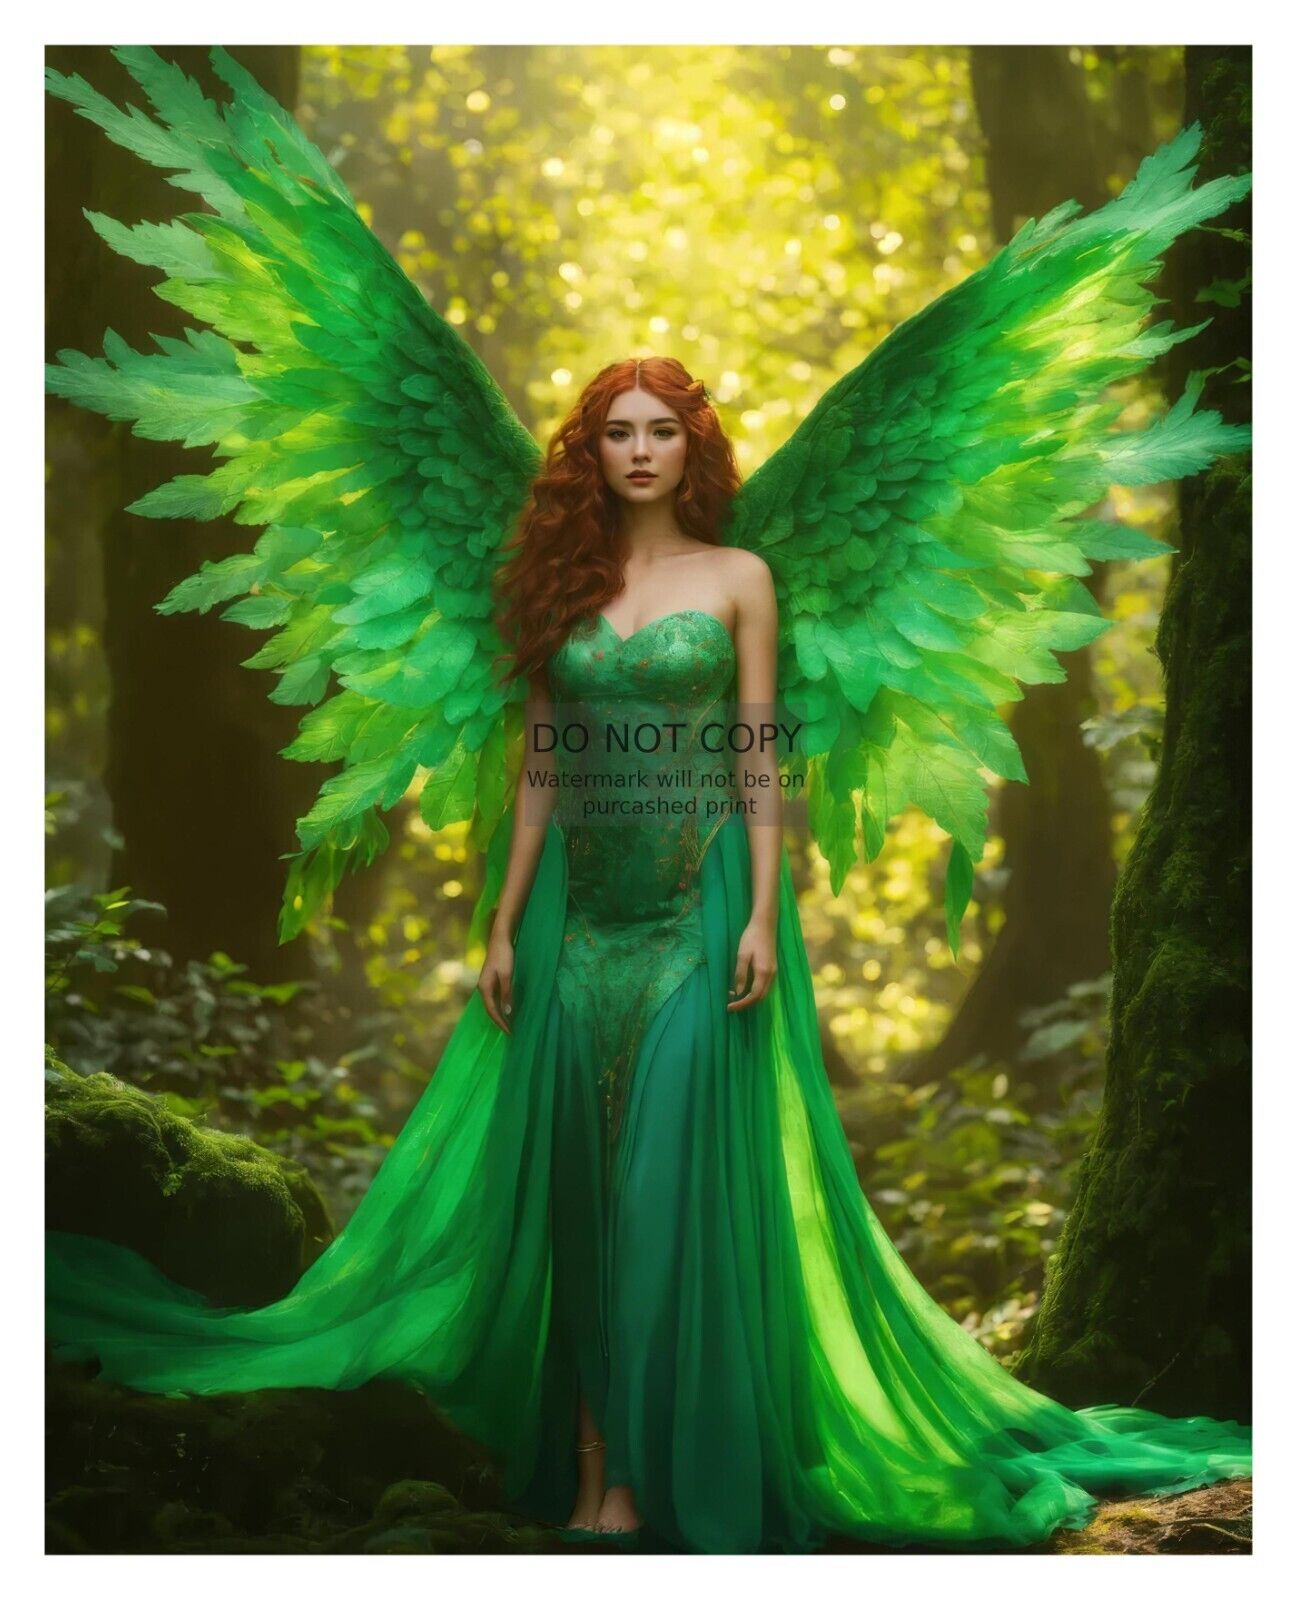 FAIRY ARTISTIC 8X10 COLLECTIBLE FANTASY ART PRINT HIGH QUALITY GLOSSY PHOTO